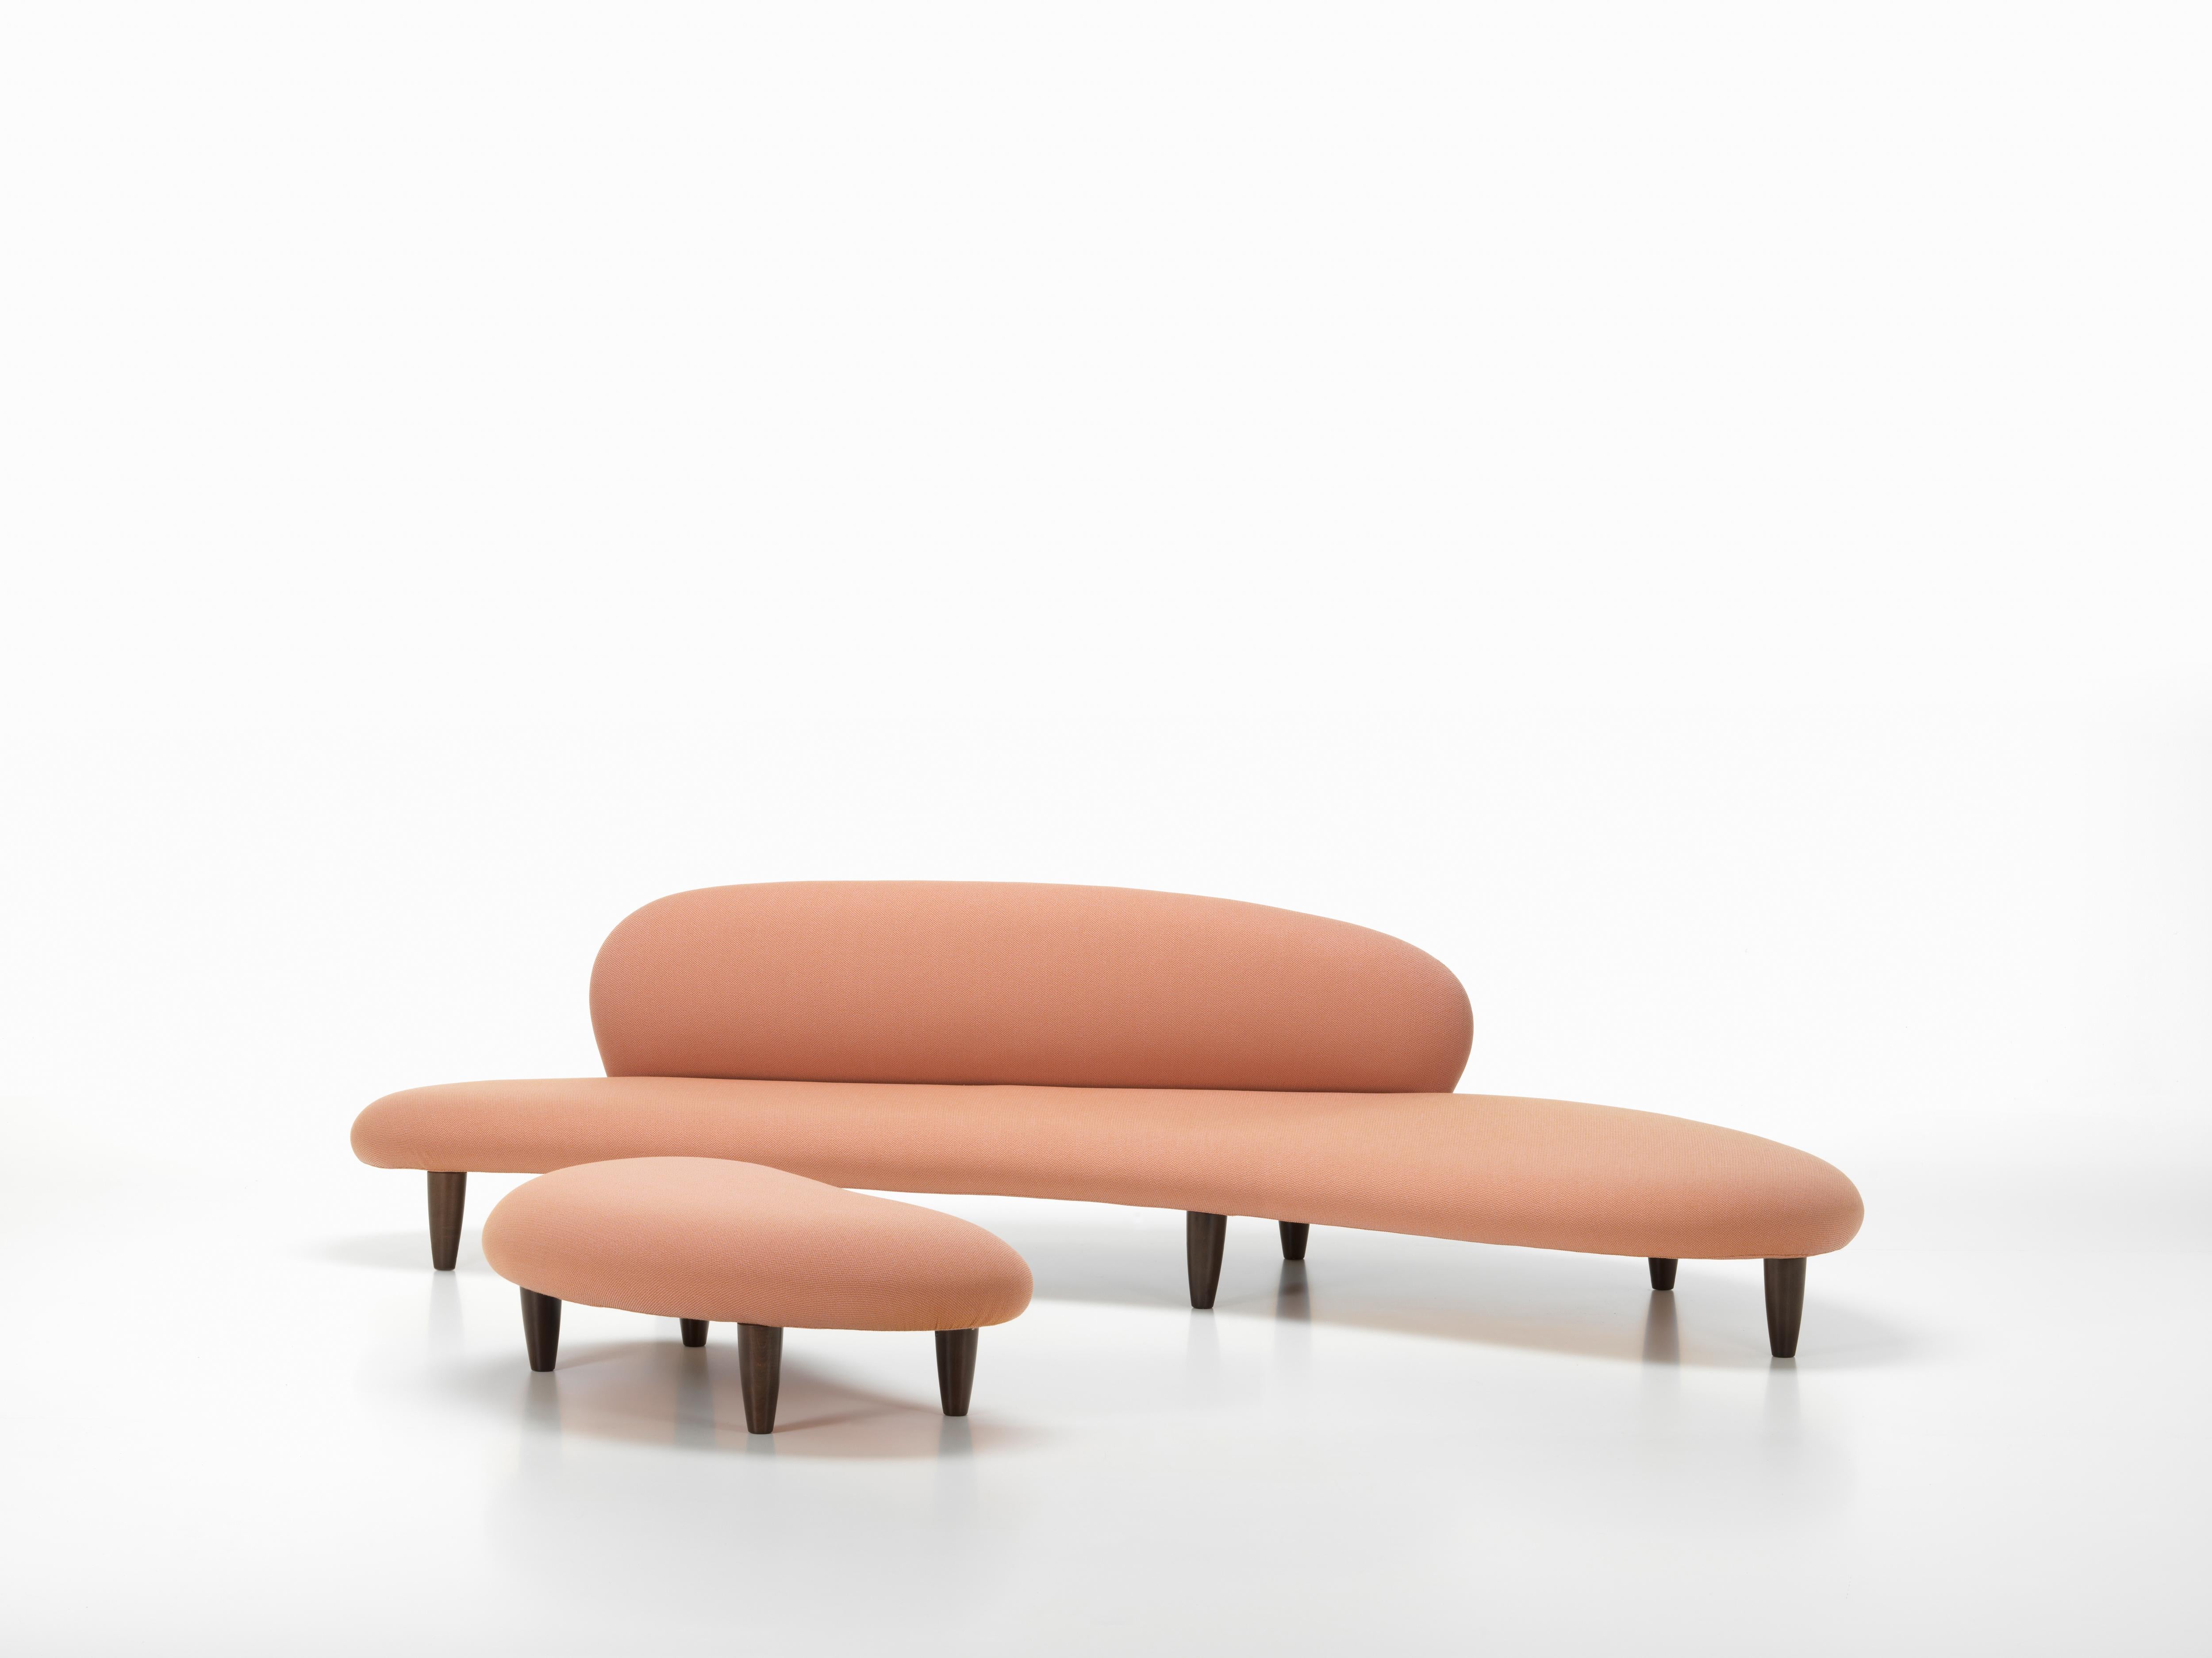 These items are only available in the United States.

The sculptural quality of Noguchi‘s design vocabulary finds expression in the freeform sofa: it is entirely different from other designs of the same period, The slender organic forms are fluid